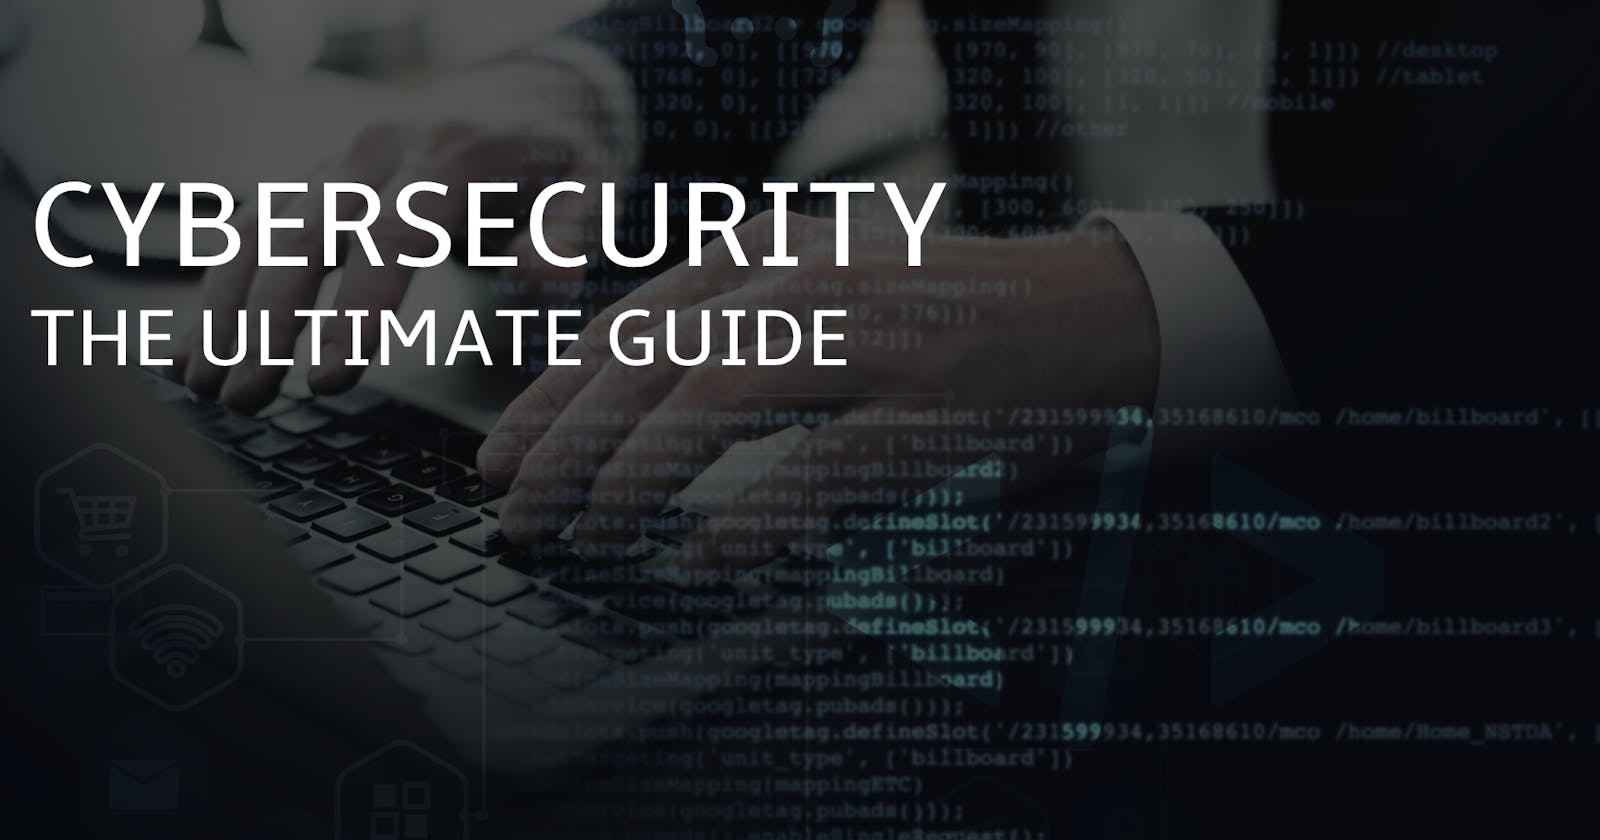 Cyber Security: The Ultimate Guide - CyberRoot Risk Advisory